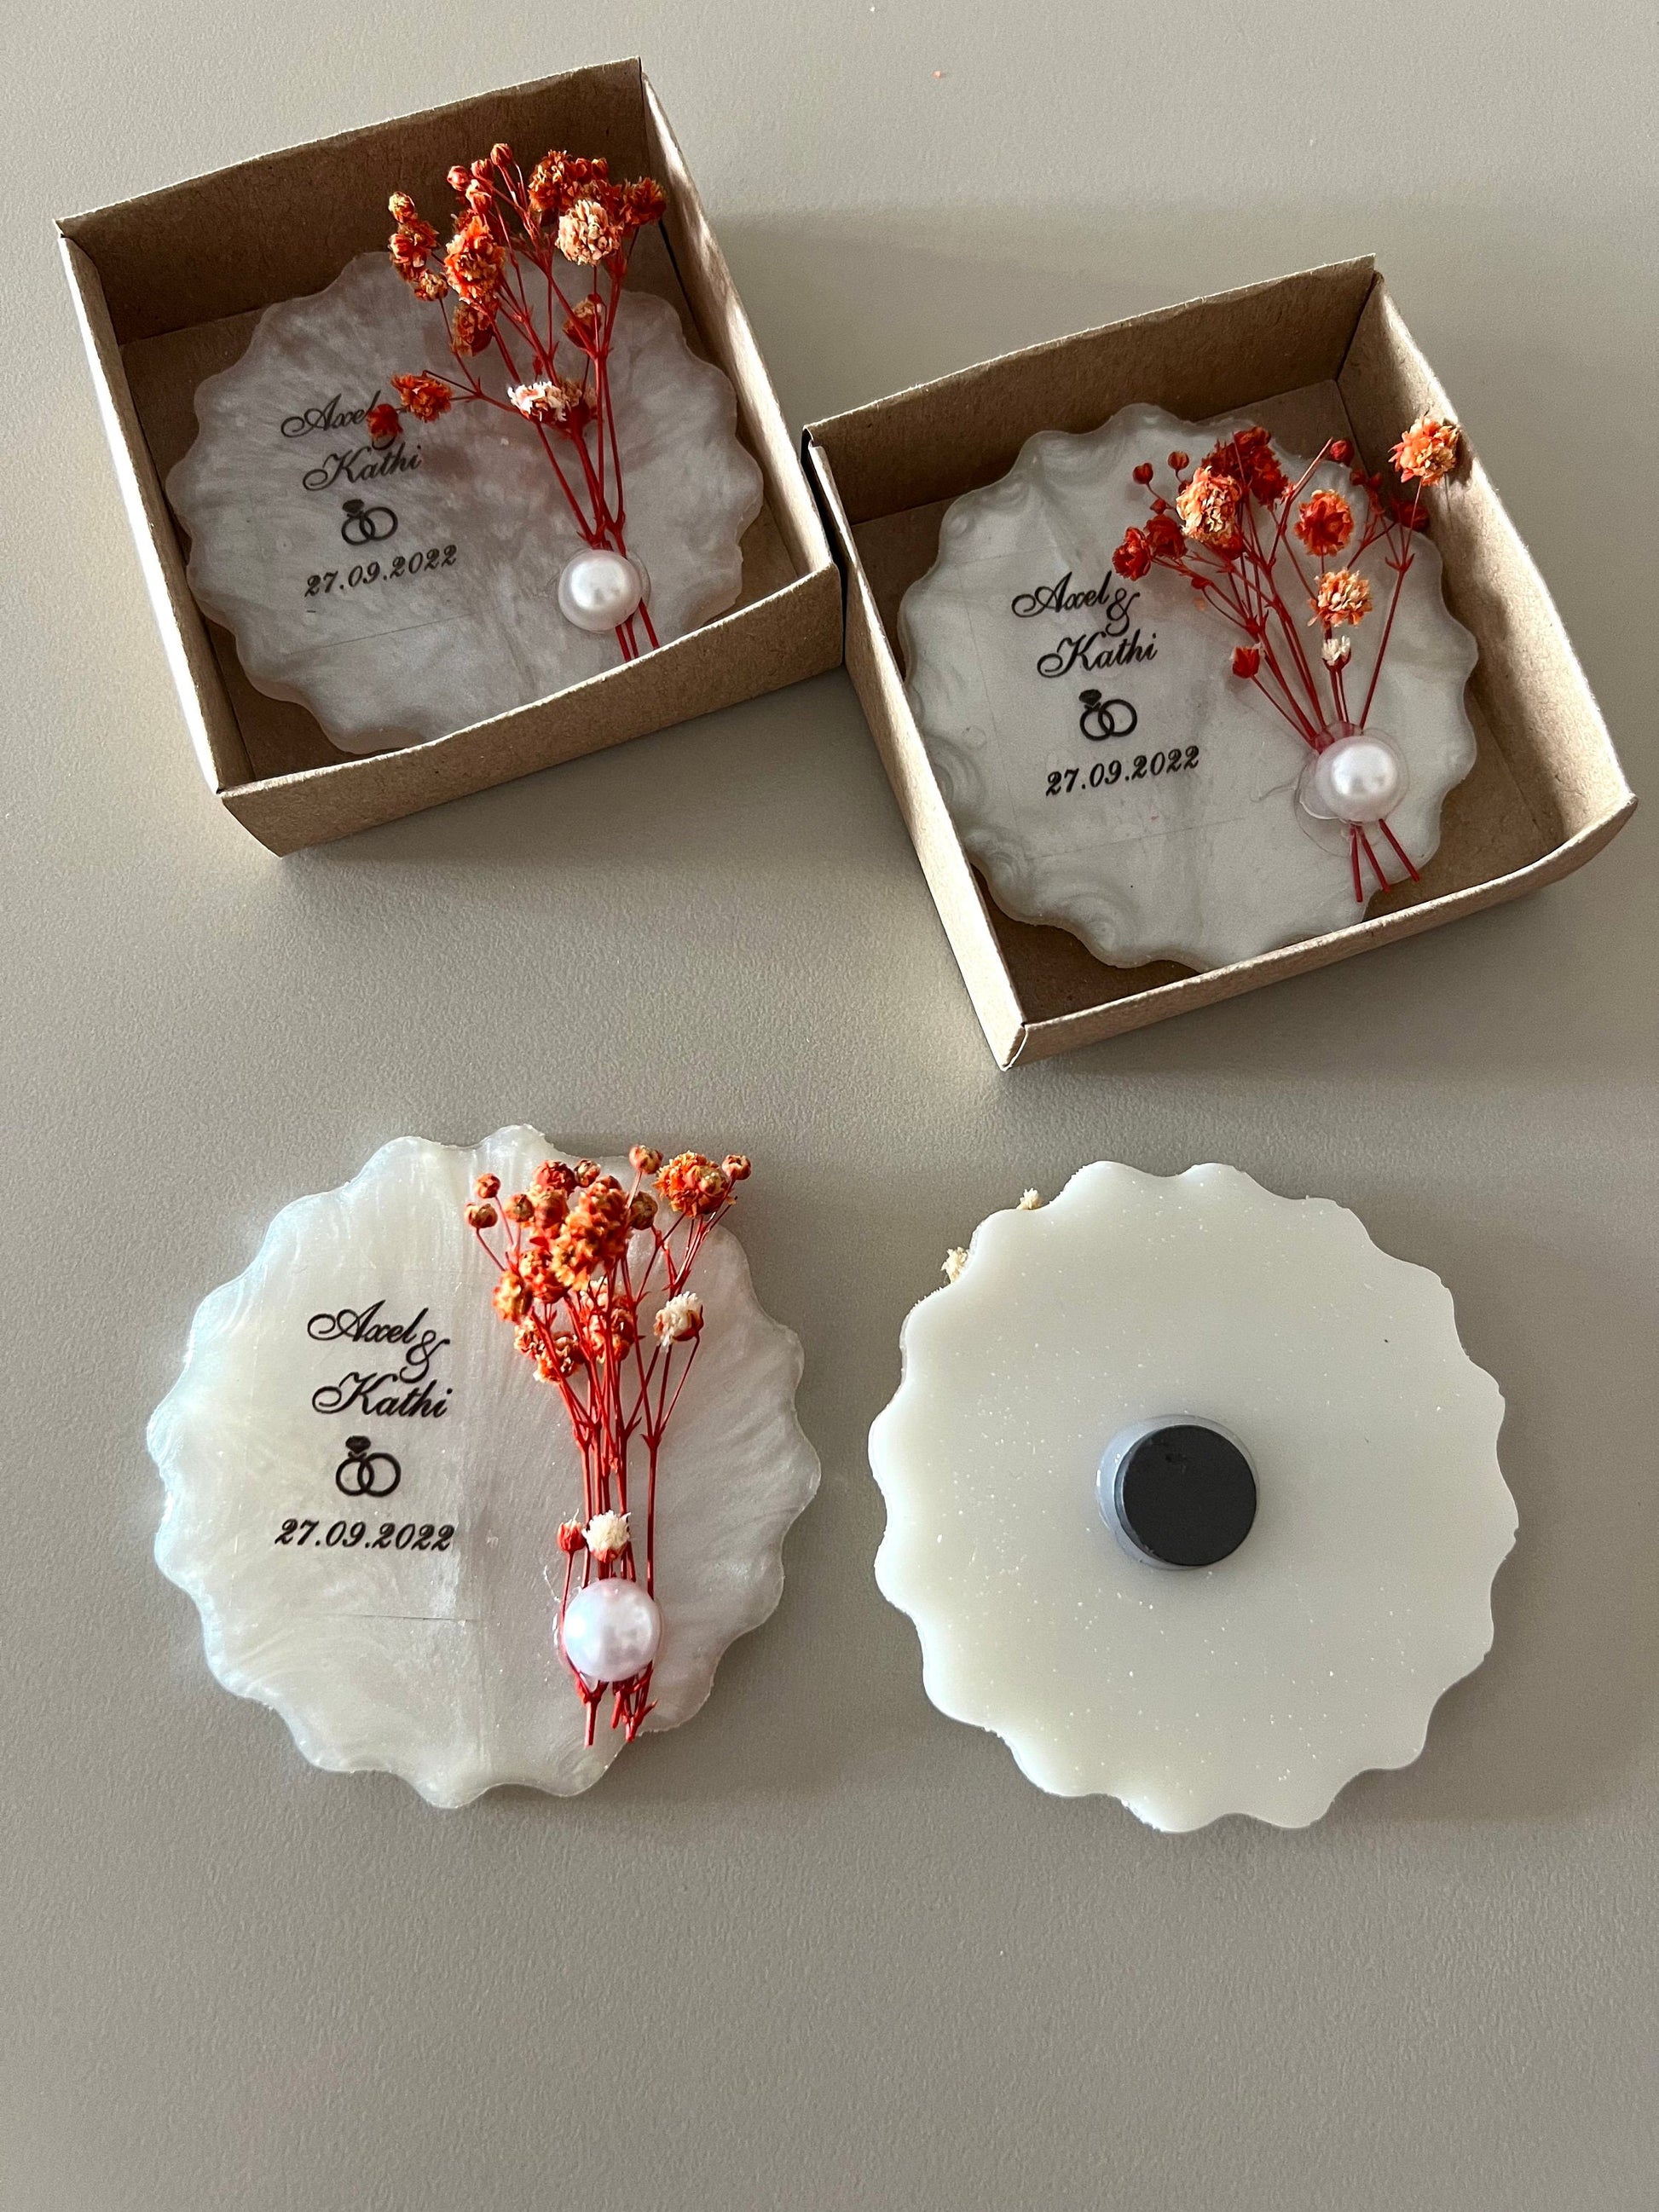 Magnet Wedding Favors | White Wedding Magnet Gifts | White Wedding Favors with Red Flowers | Bridesmaid Gifts | Party Favors in Bulk